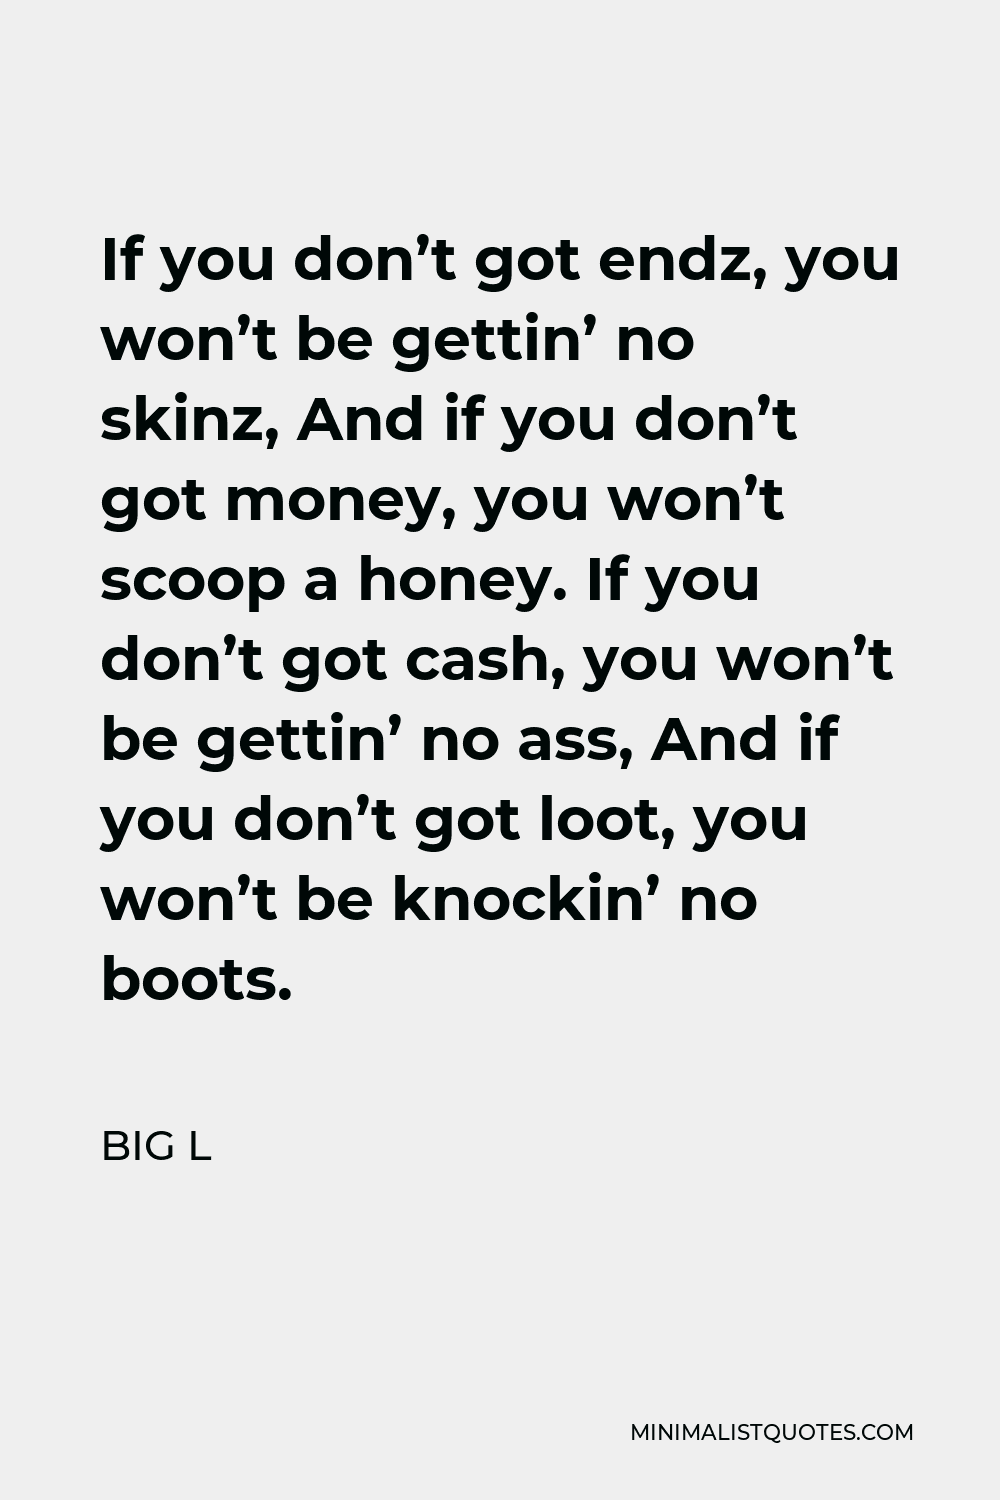 Big L Quote - If you don’t got endz, you won’t be gettin’ no skinz, And if you don’t got money, you won’t scoop a honey. If you don’t got cash, you won’t be gettin’ no ass, And if you don’t got loot, you won’t be knockin’ no boots.